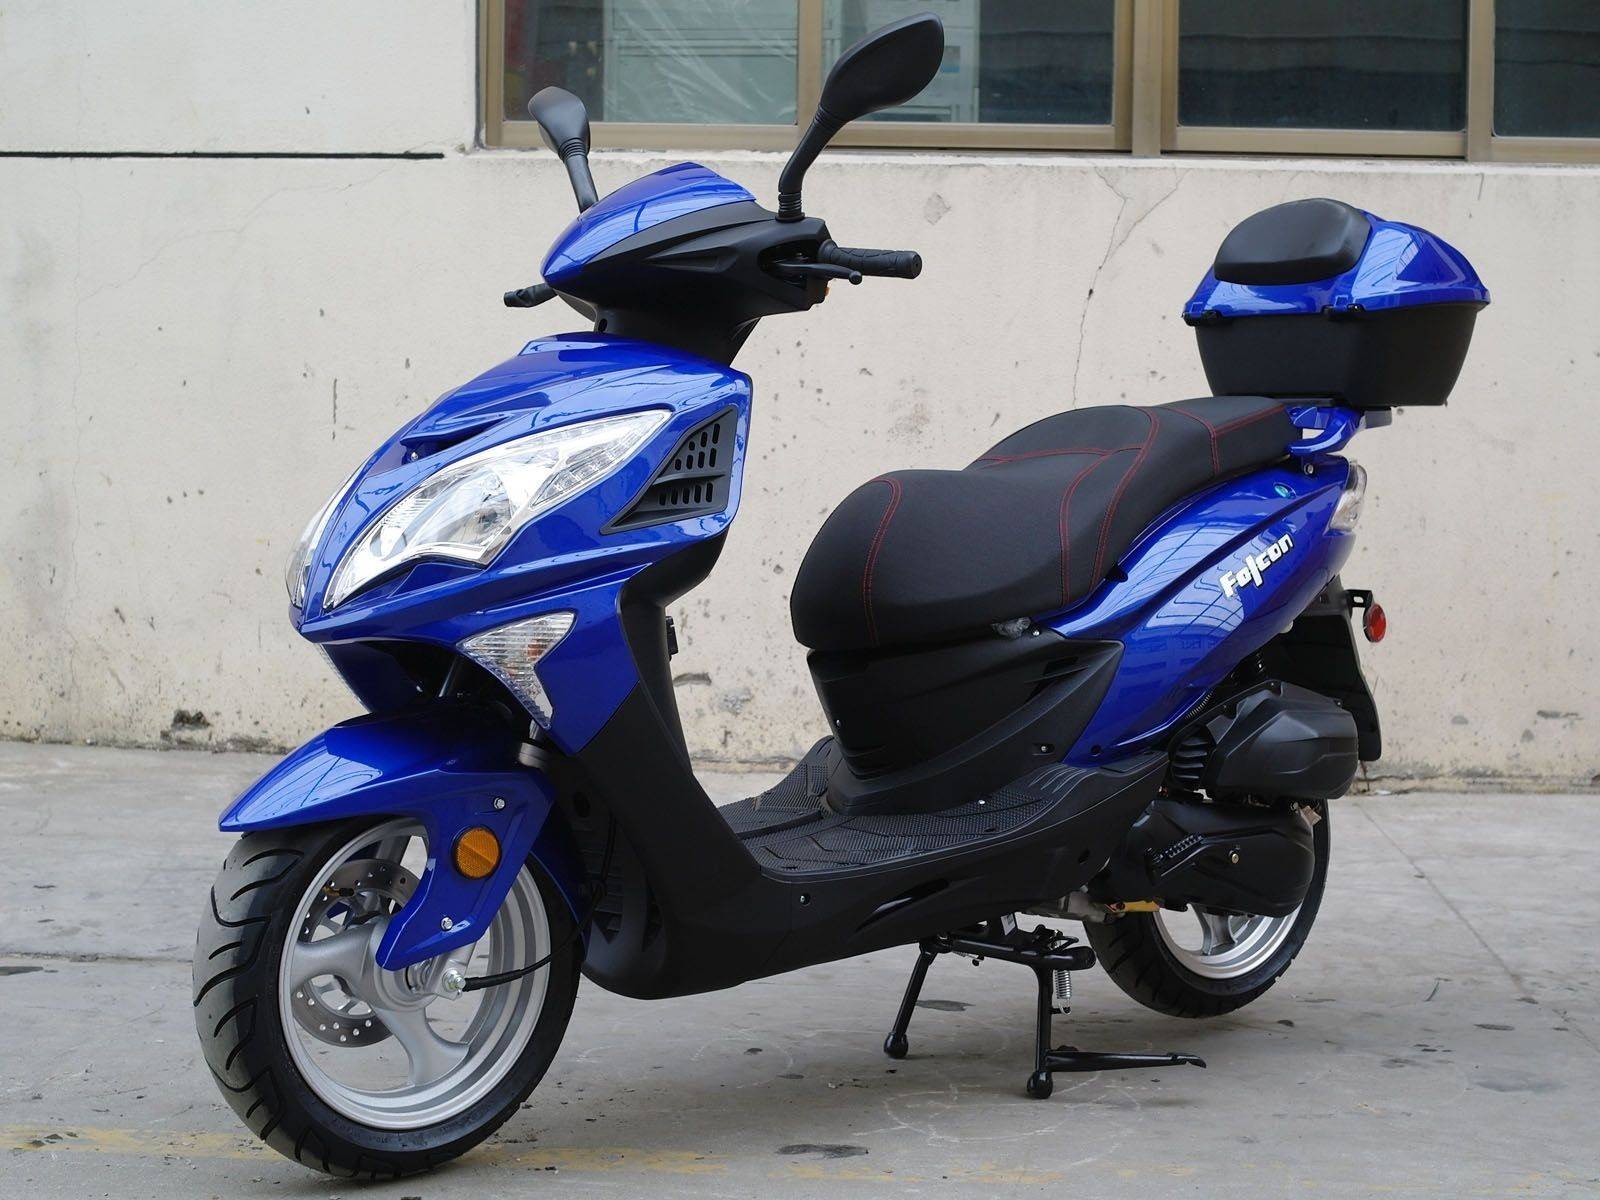 Wheel Big | Gas 200cc Scooter redfoxpowersports Blue, Moped CVT Automatic and 200cc Falcon Body Engine,